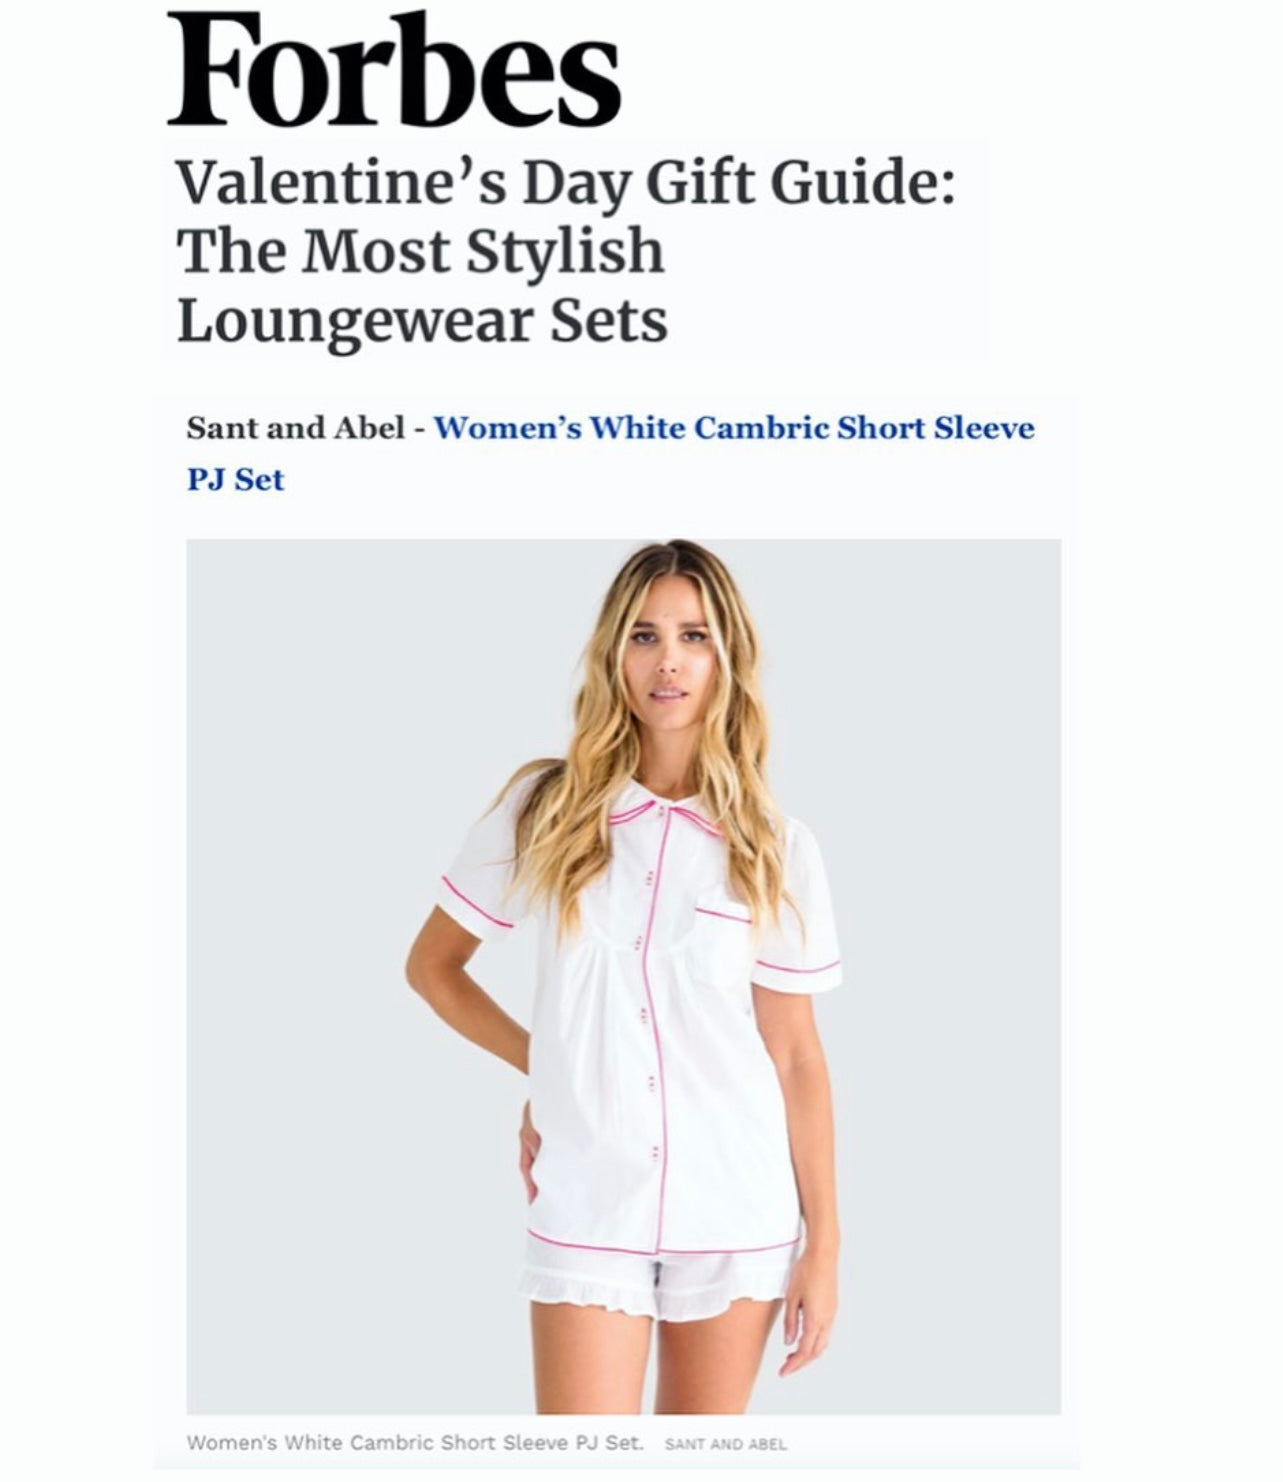 Forbes Valentines Day